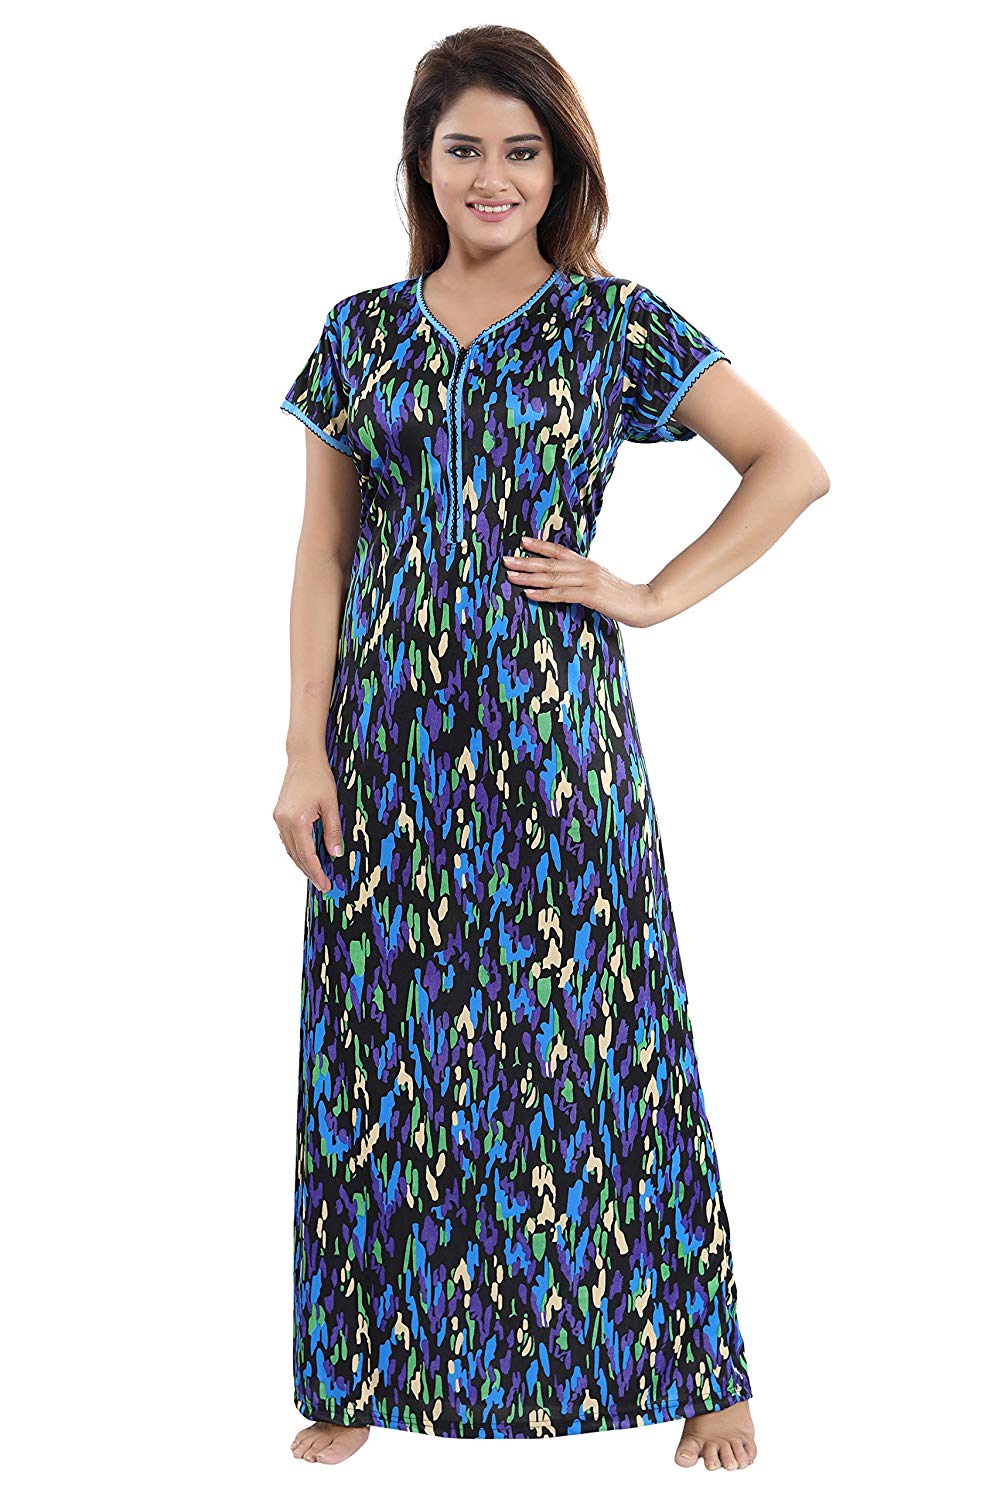 Buy ANGLINA Women's Full Sleeve Floral Printed Sinker Cotton Nighty/Maxi/ Nightwear/Nightgown/Gown WSR-15 (Color : Blue, Size : XL) at Amazon.in